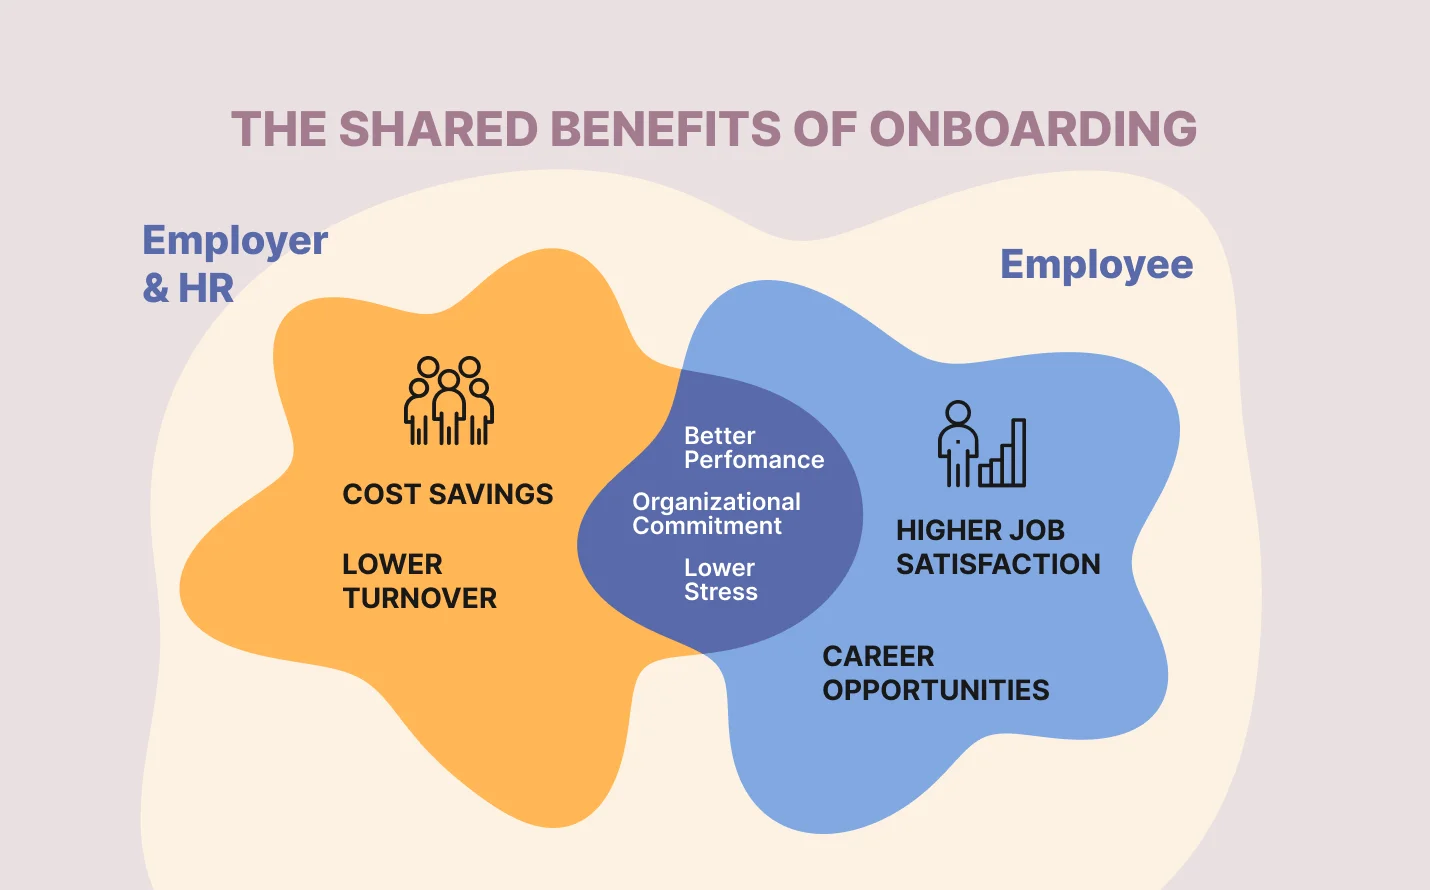 The shared benefits of onboarding